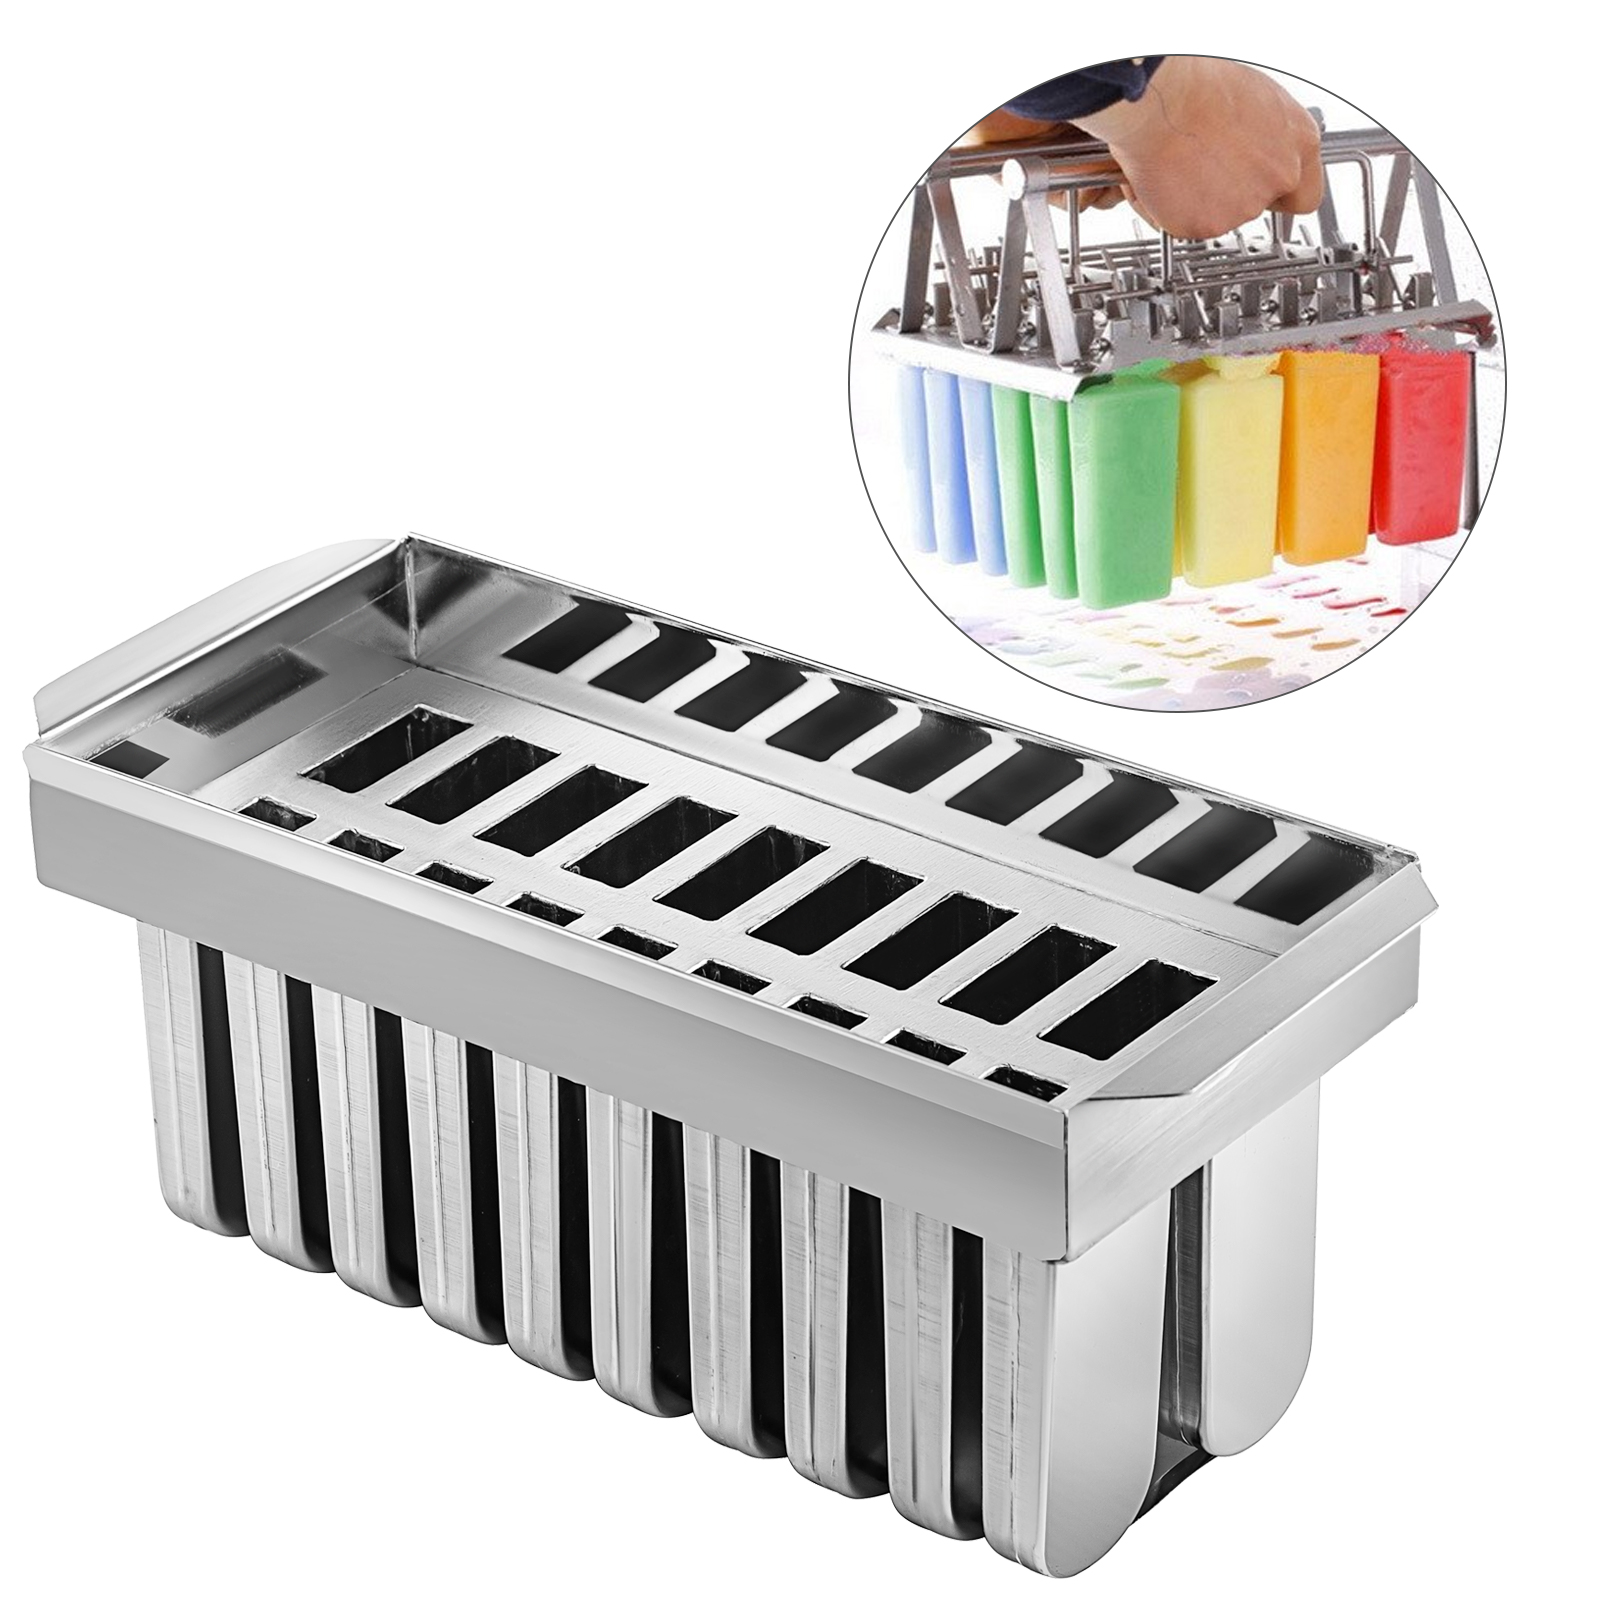 20pcs Stainless Steel Popsicle Molds Ice Cream Stick Holder Silver Home DIY  Ice Cream Moulds Ice Mould Ice Lolly Popsicle